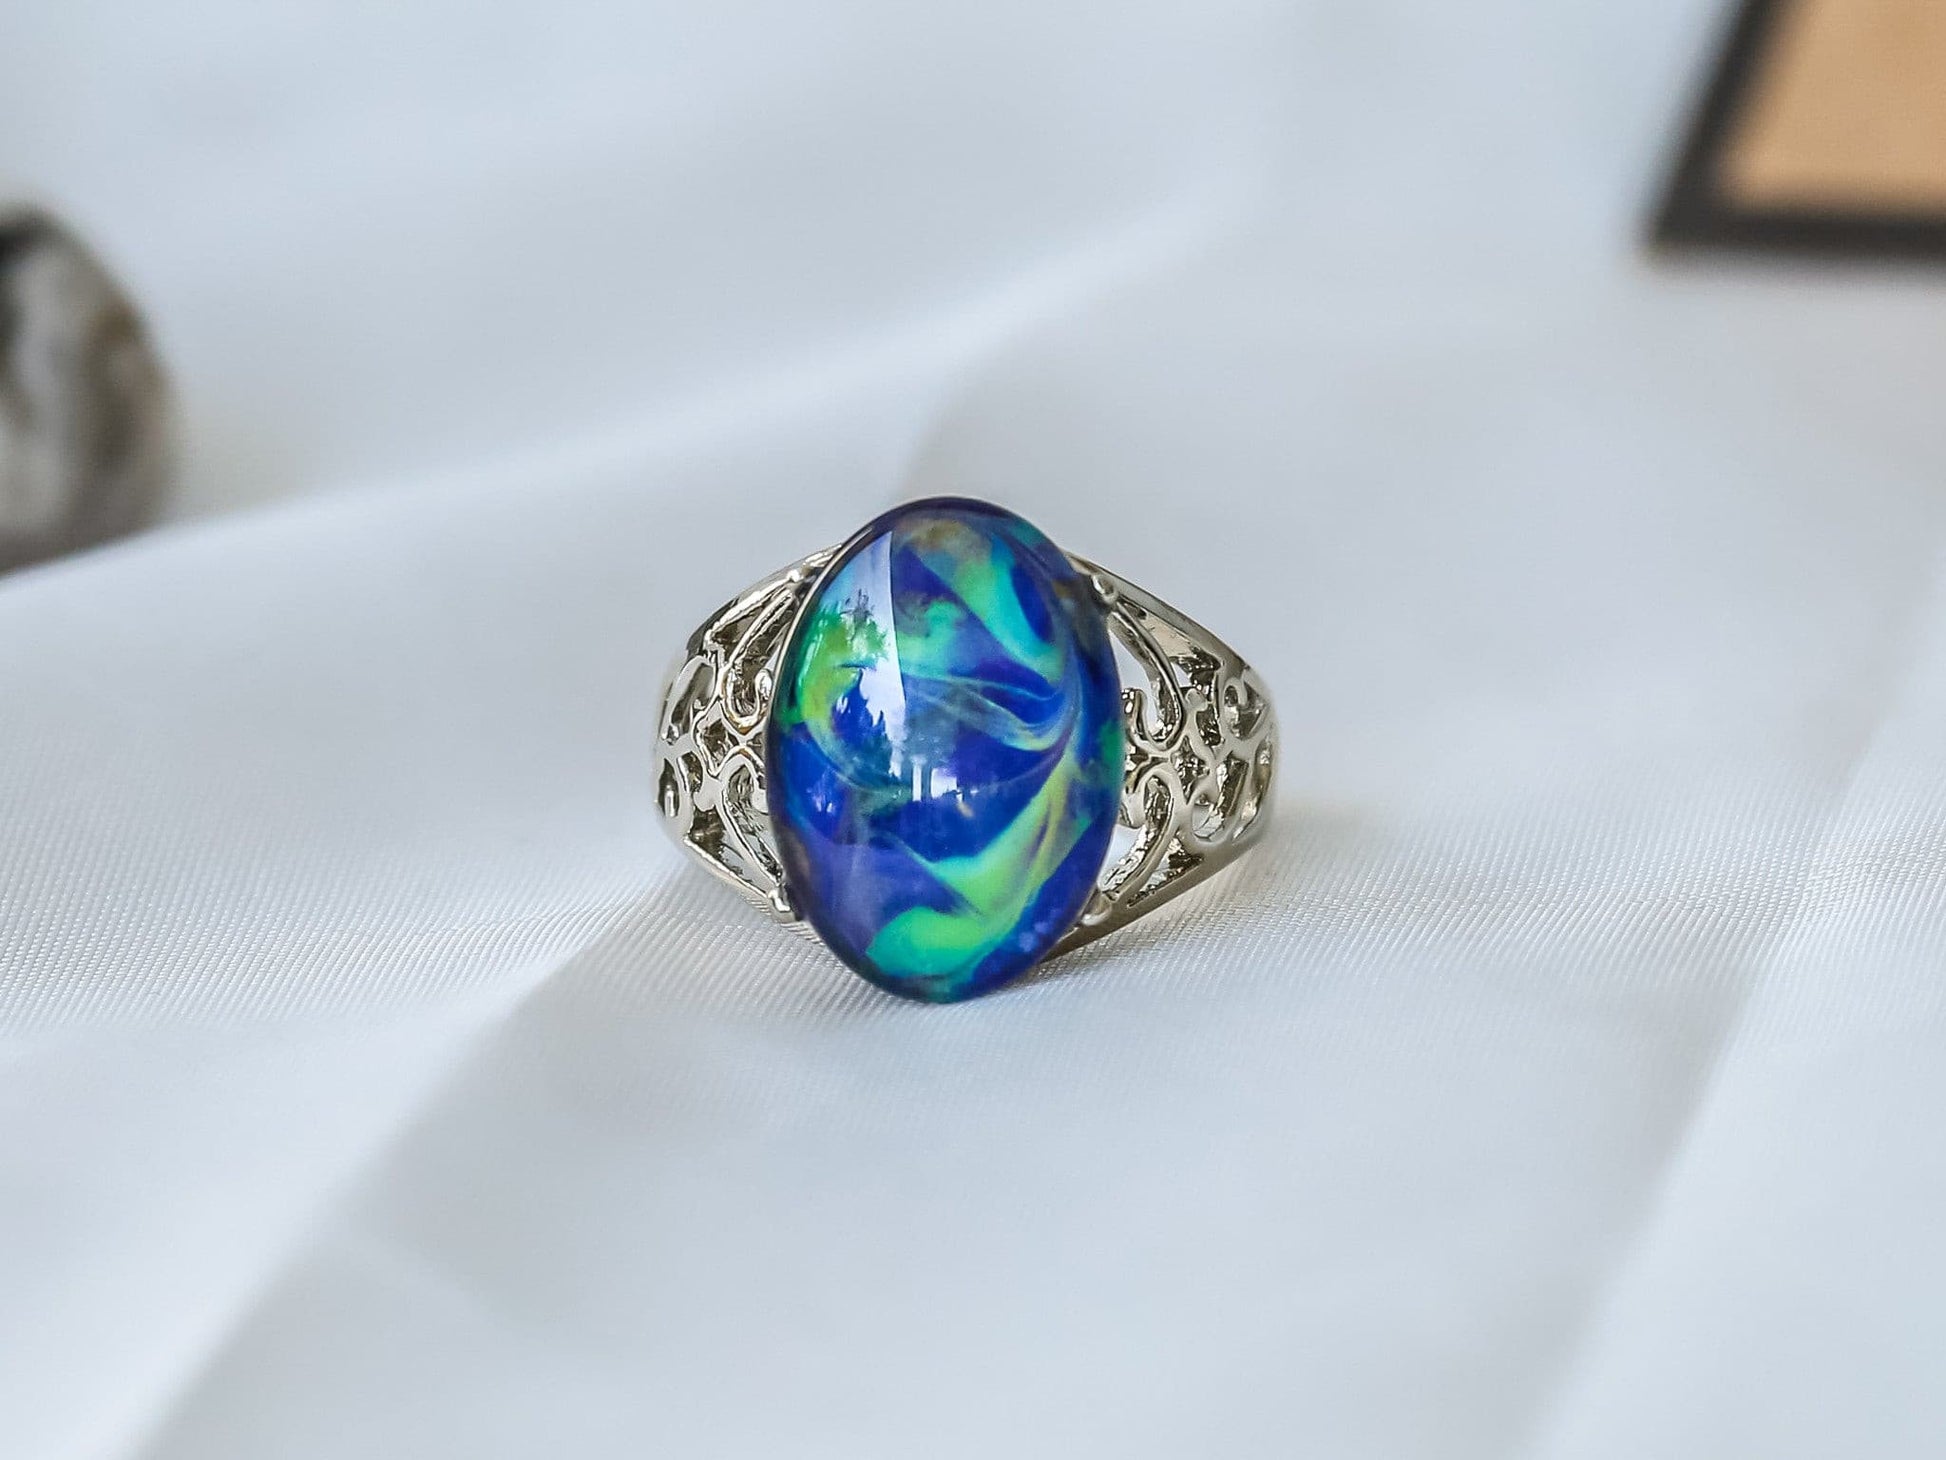 Limited Edition Borderless Opalescent Oval Stone Mood Ring.